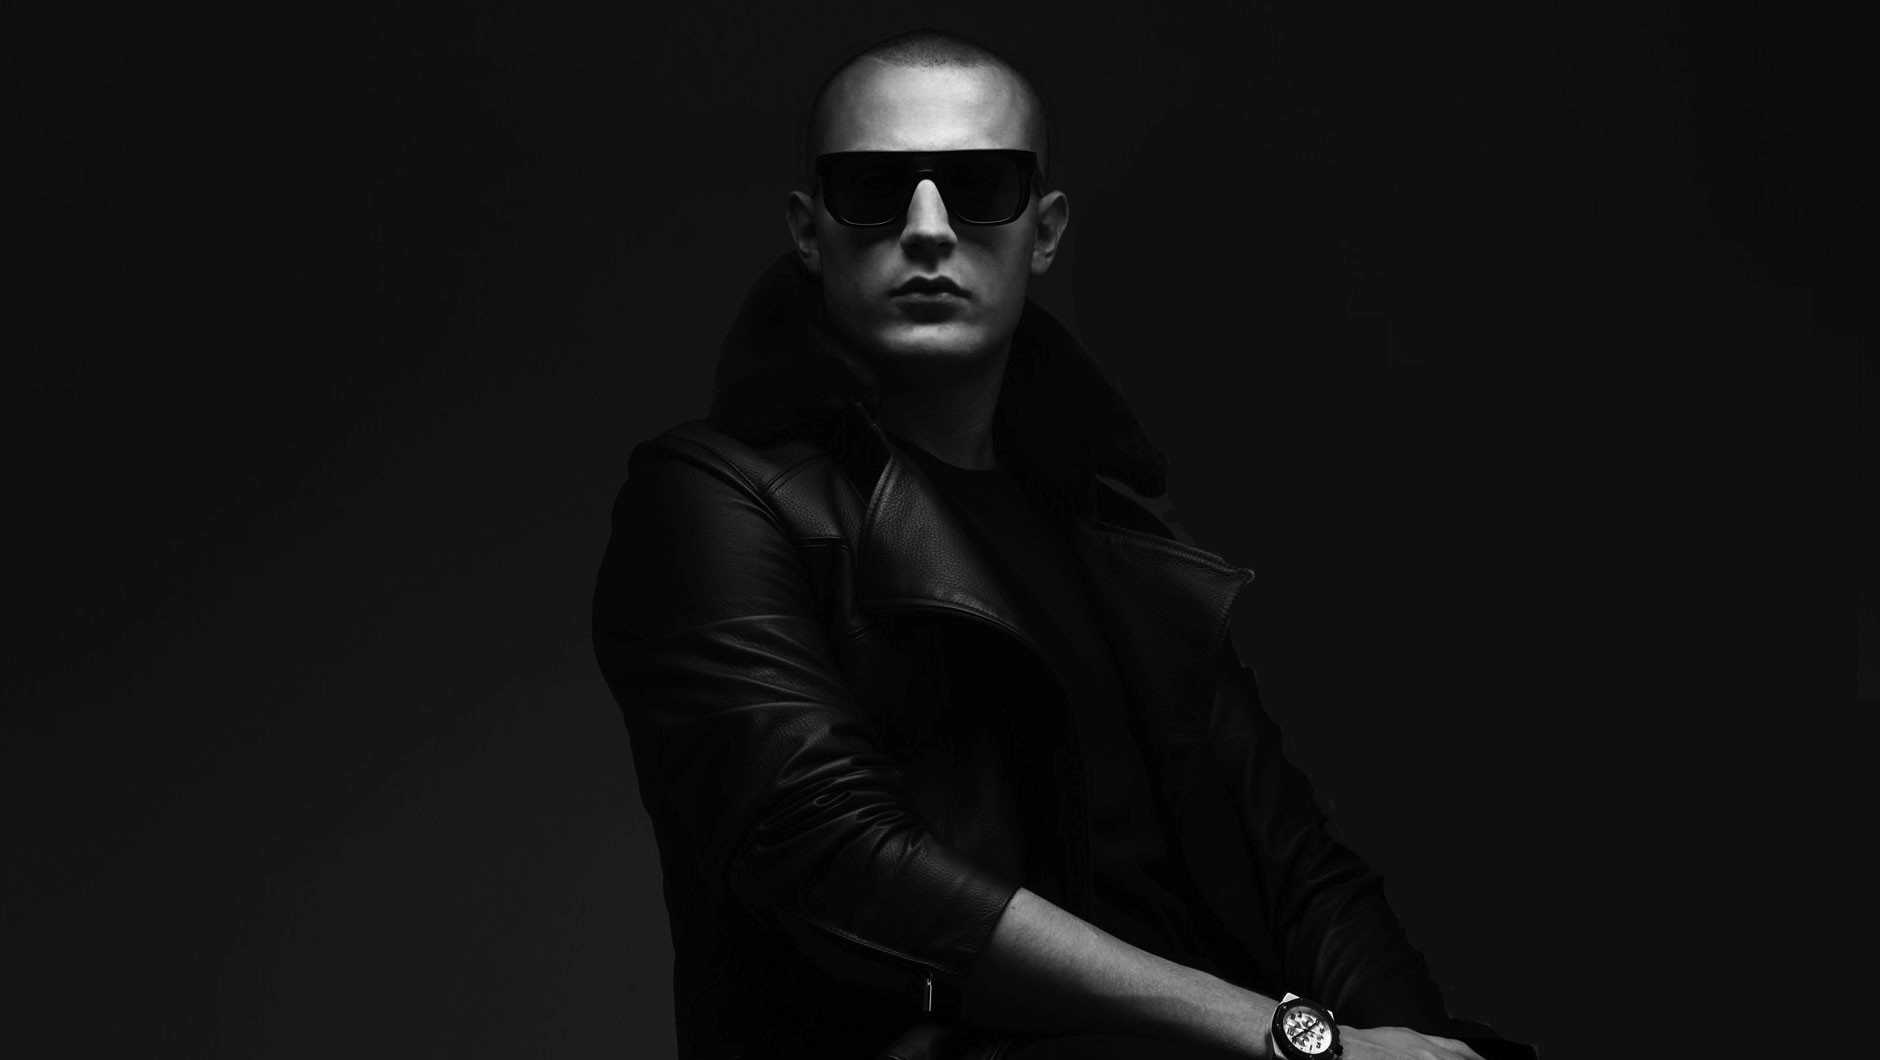 DJ Snake announces he has new music on the way | DJMag.com